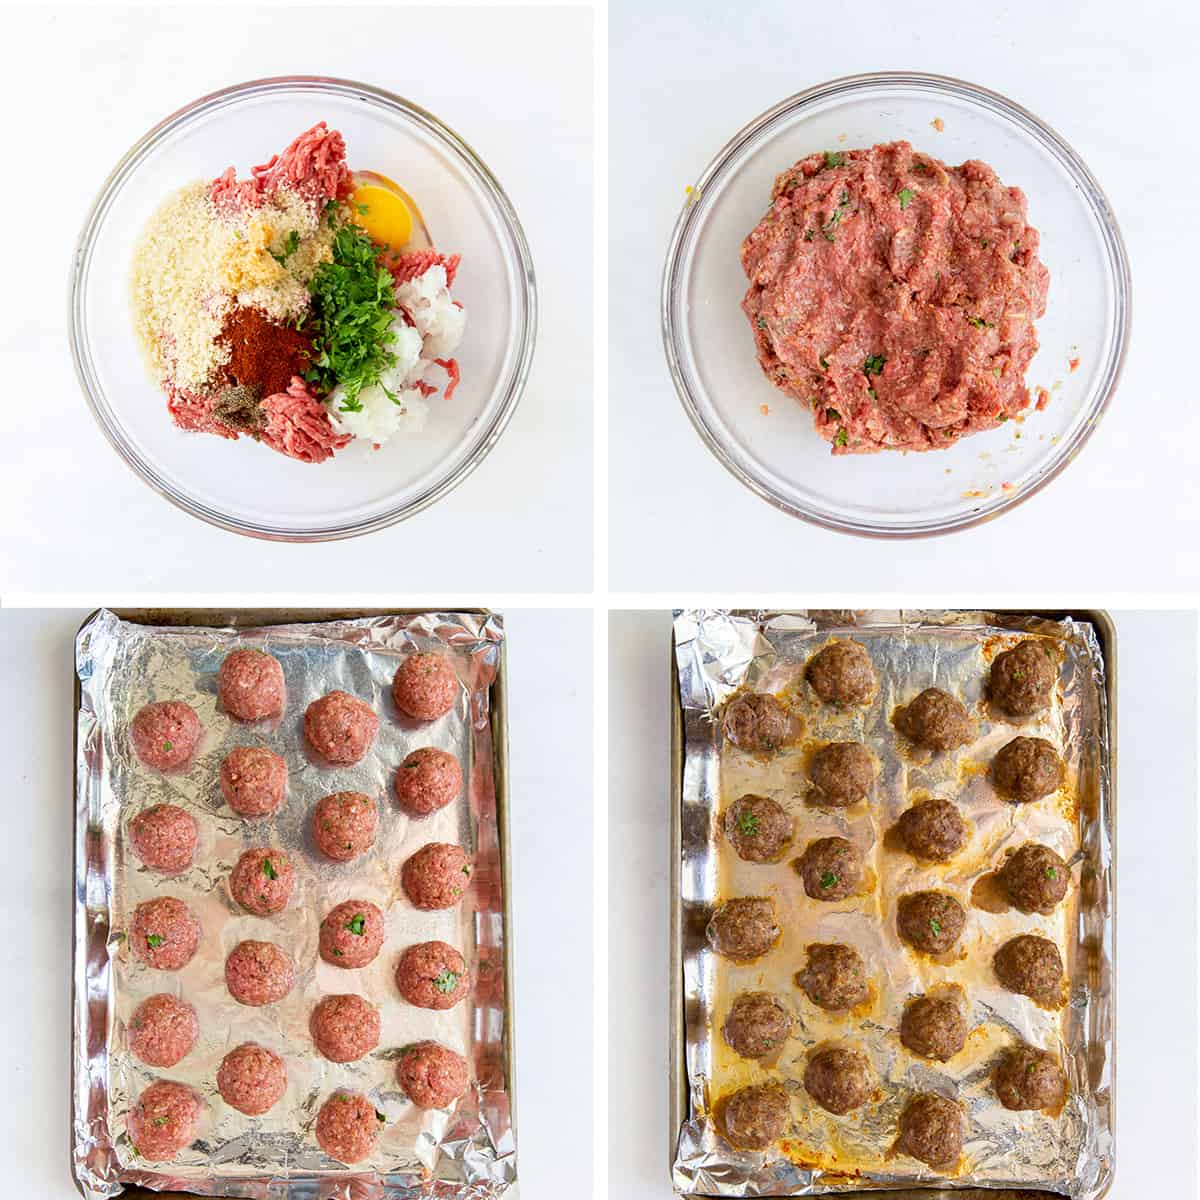 Meatball ingredients combined in a bowl and meatballs on a baking sheet.